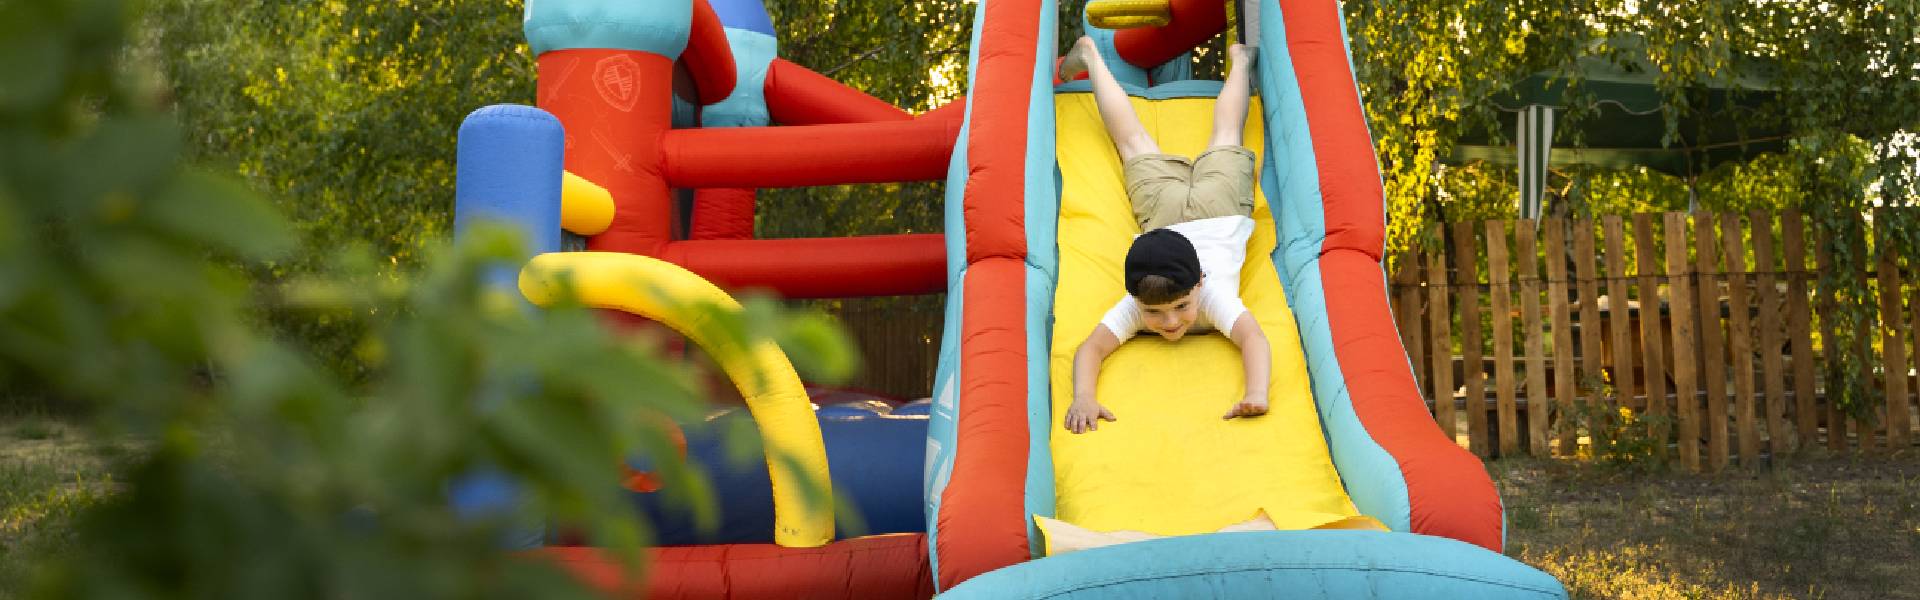 kid-playing-in-bounce-house-in-outdoor